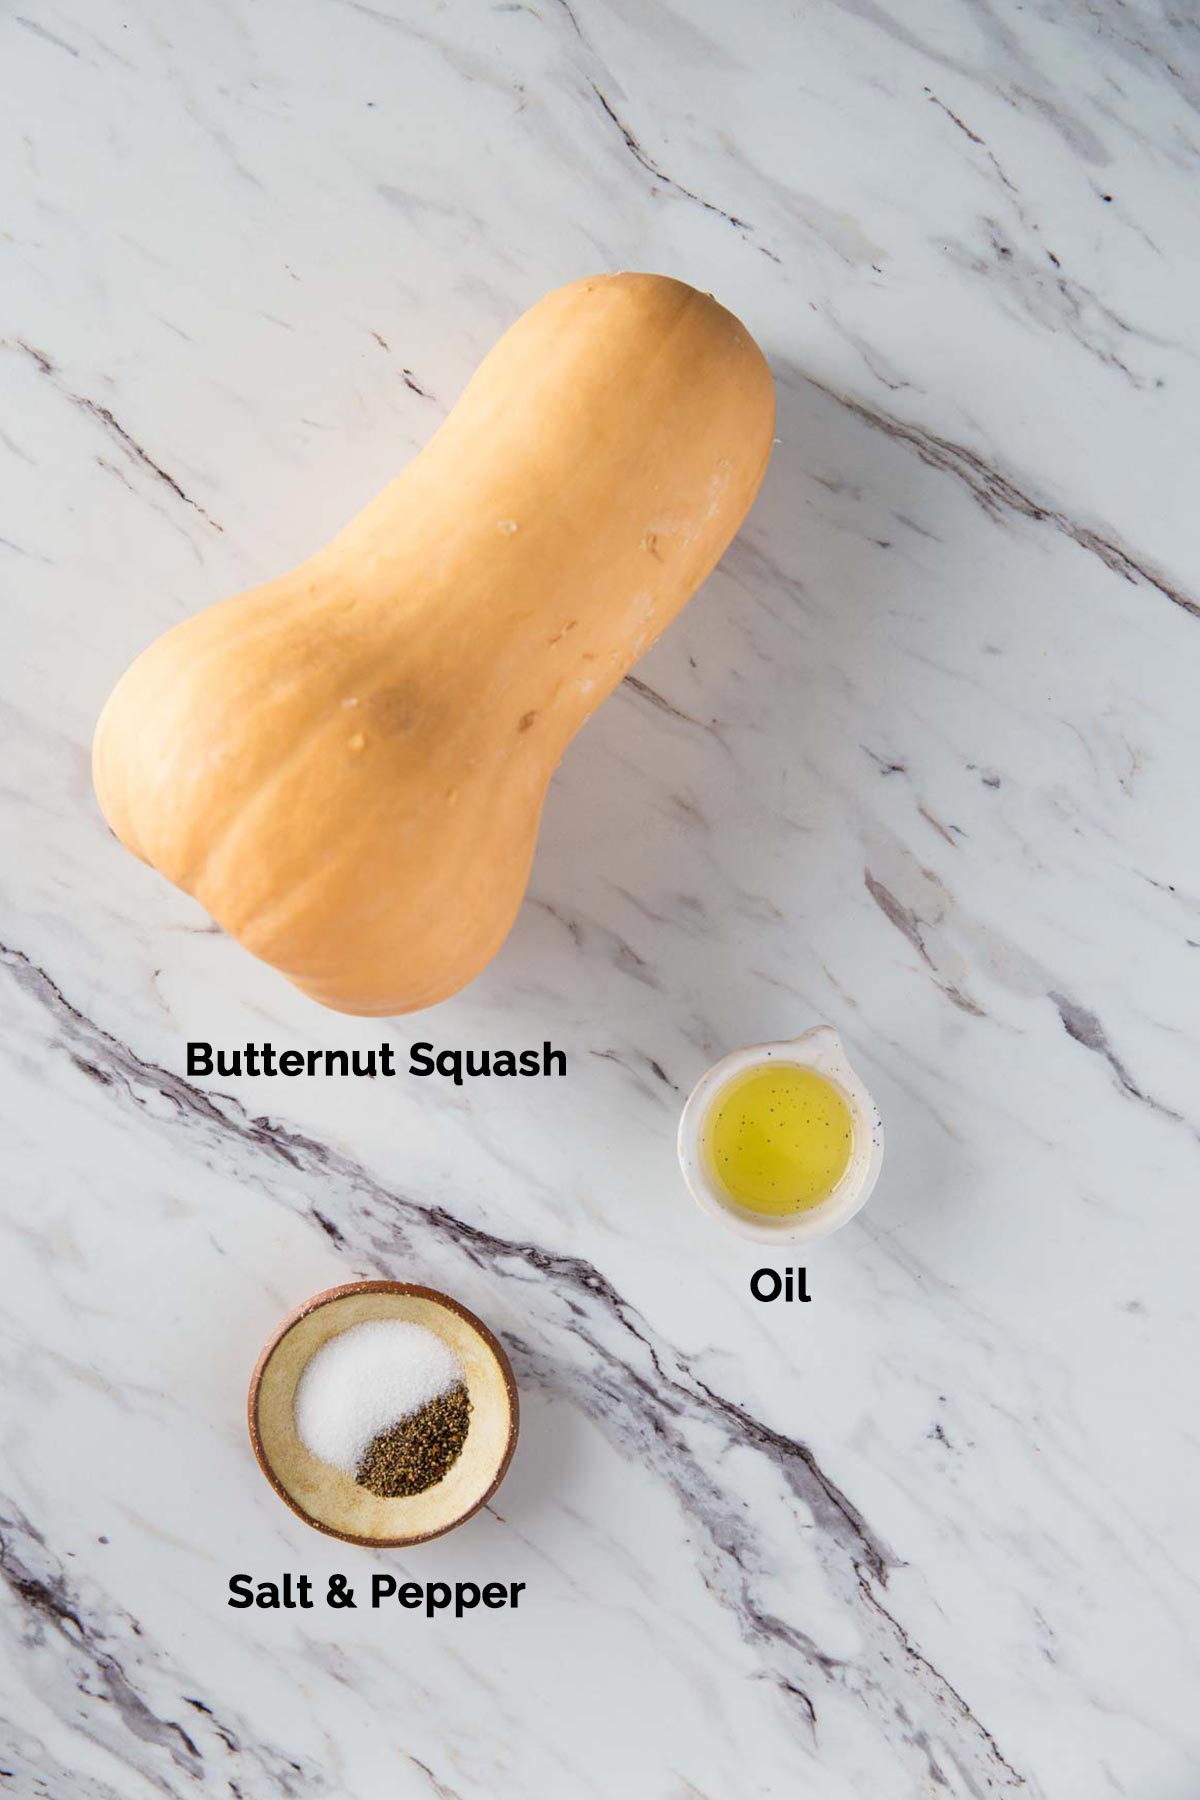 Ingredients to make butternut squash in the air fryer.